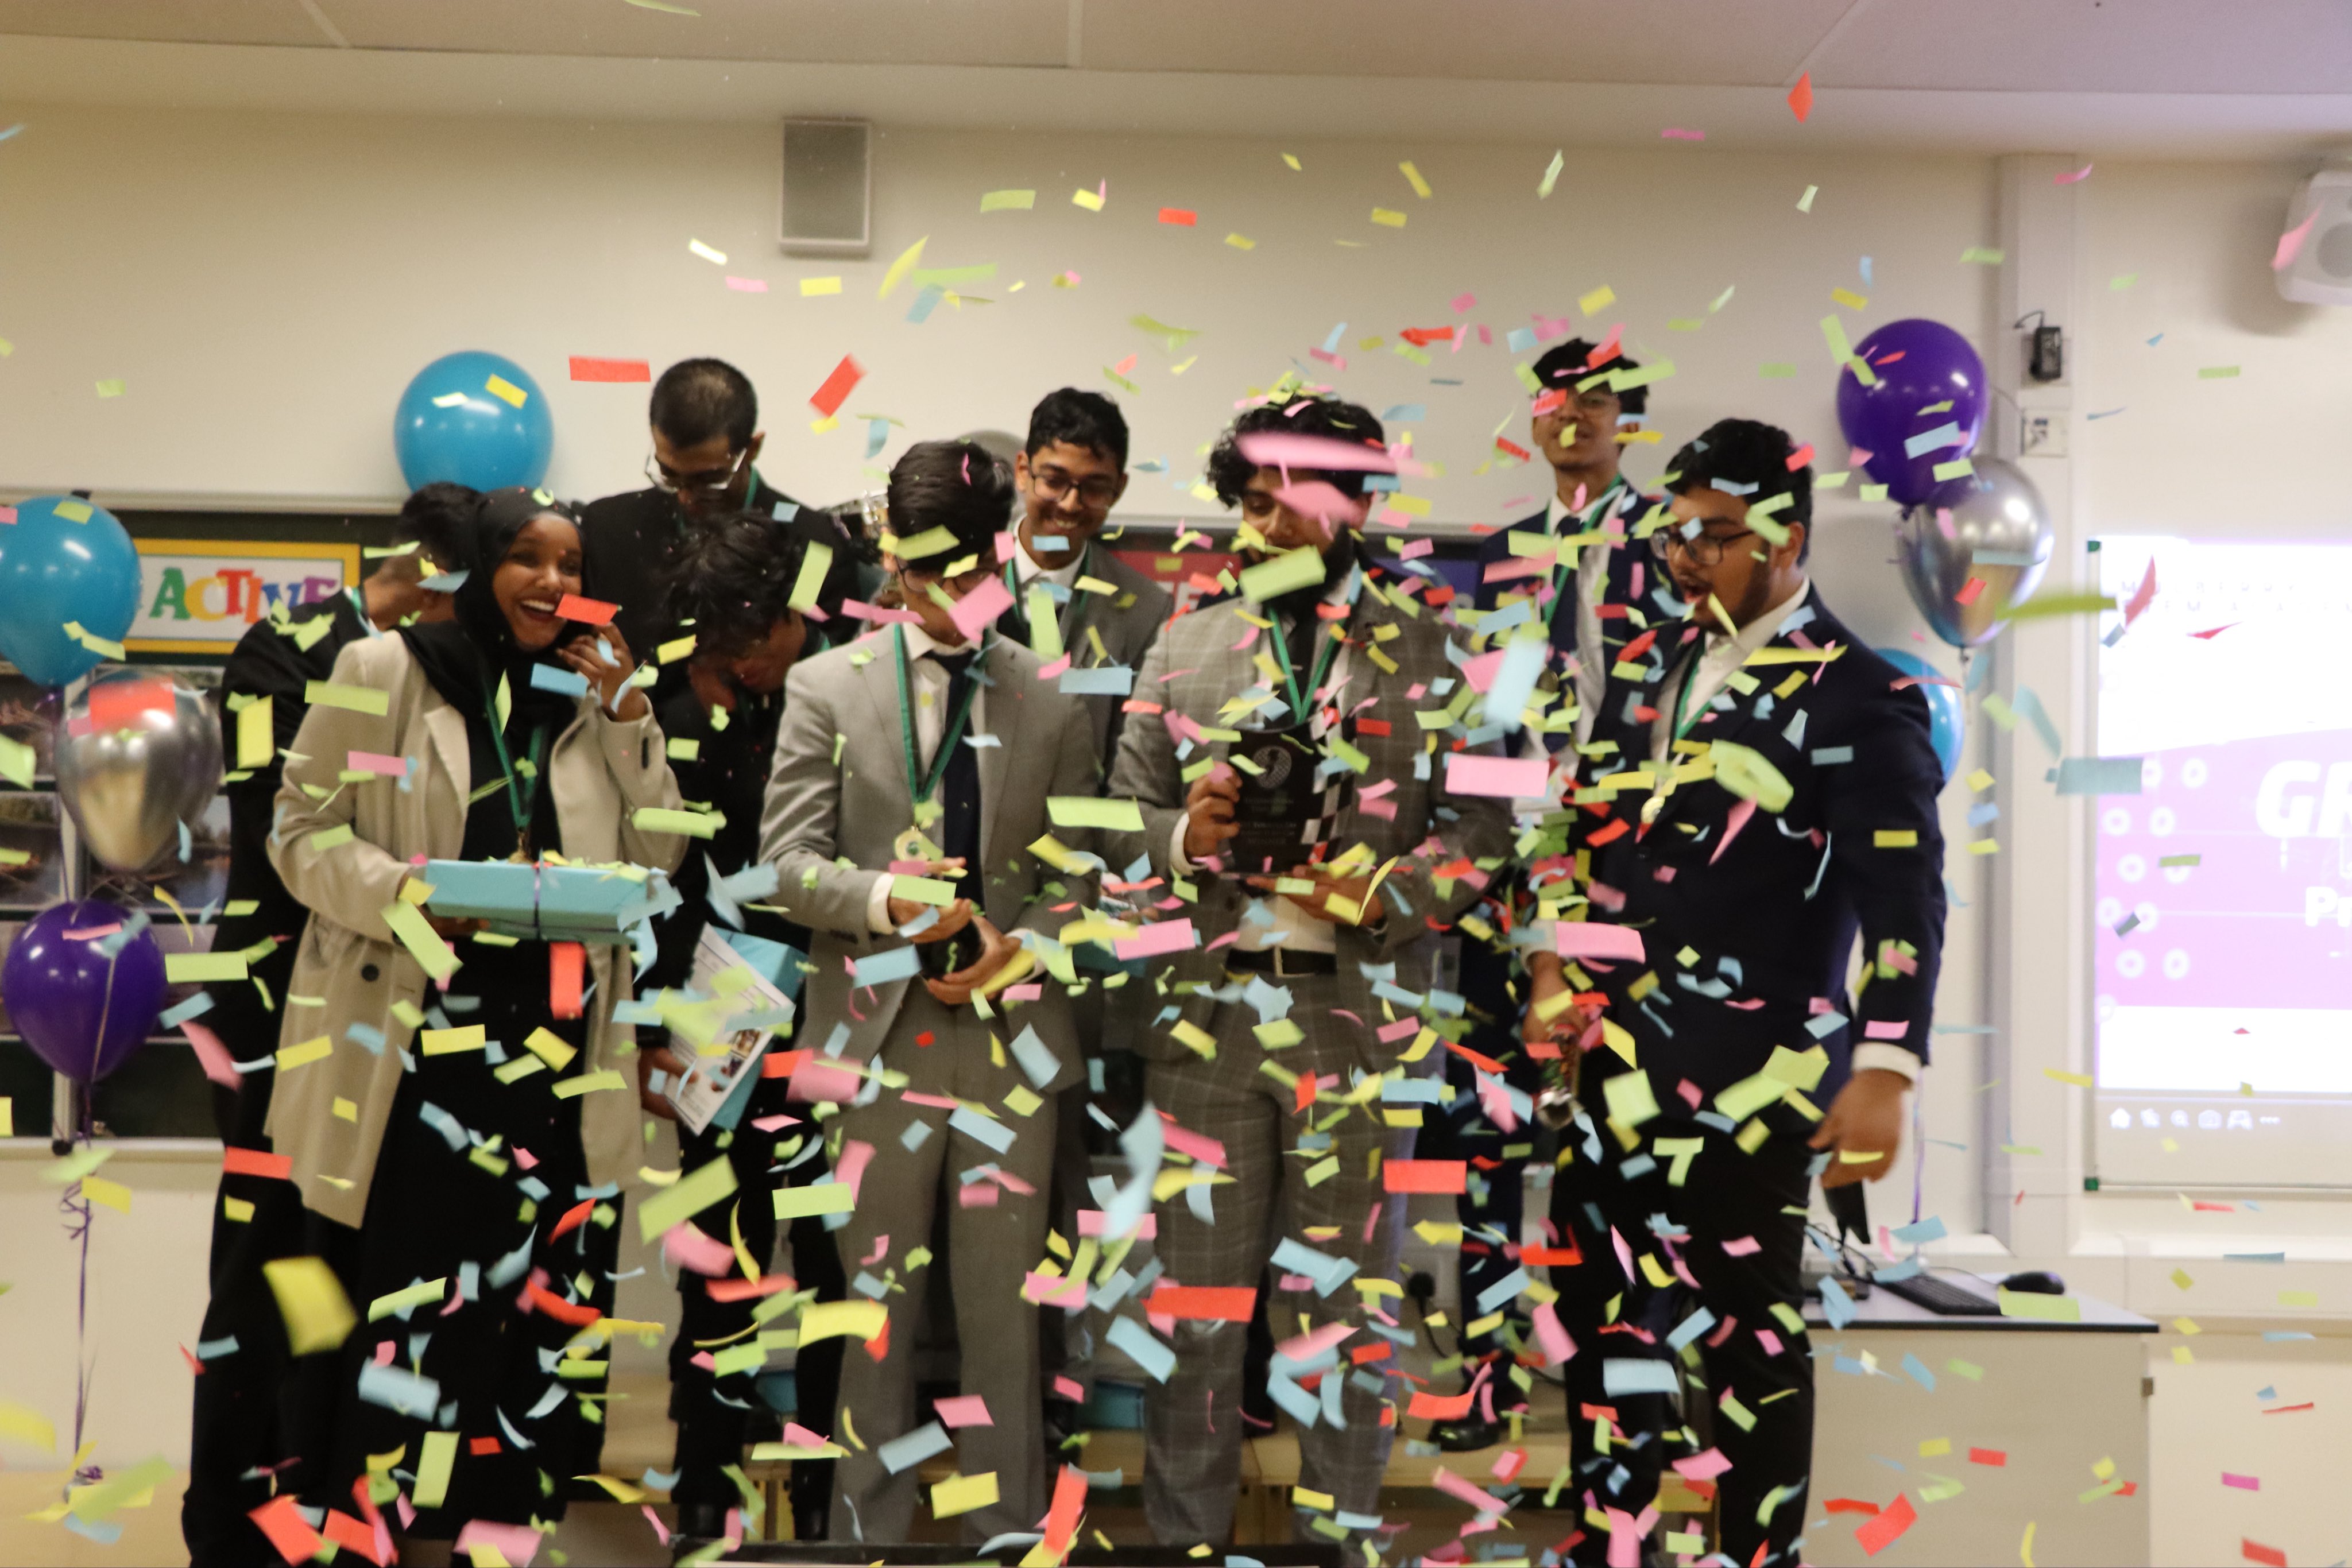 Greenpower winners experience podiums, sprays and confetti at special celebration event